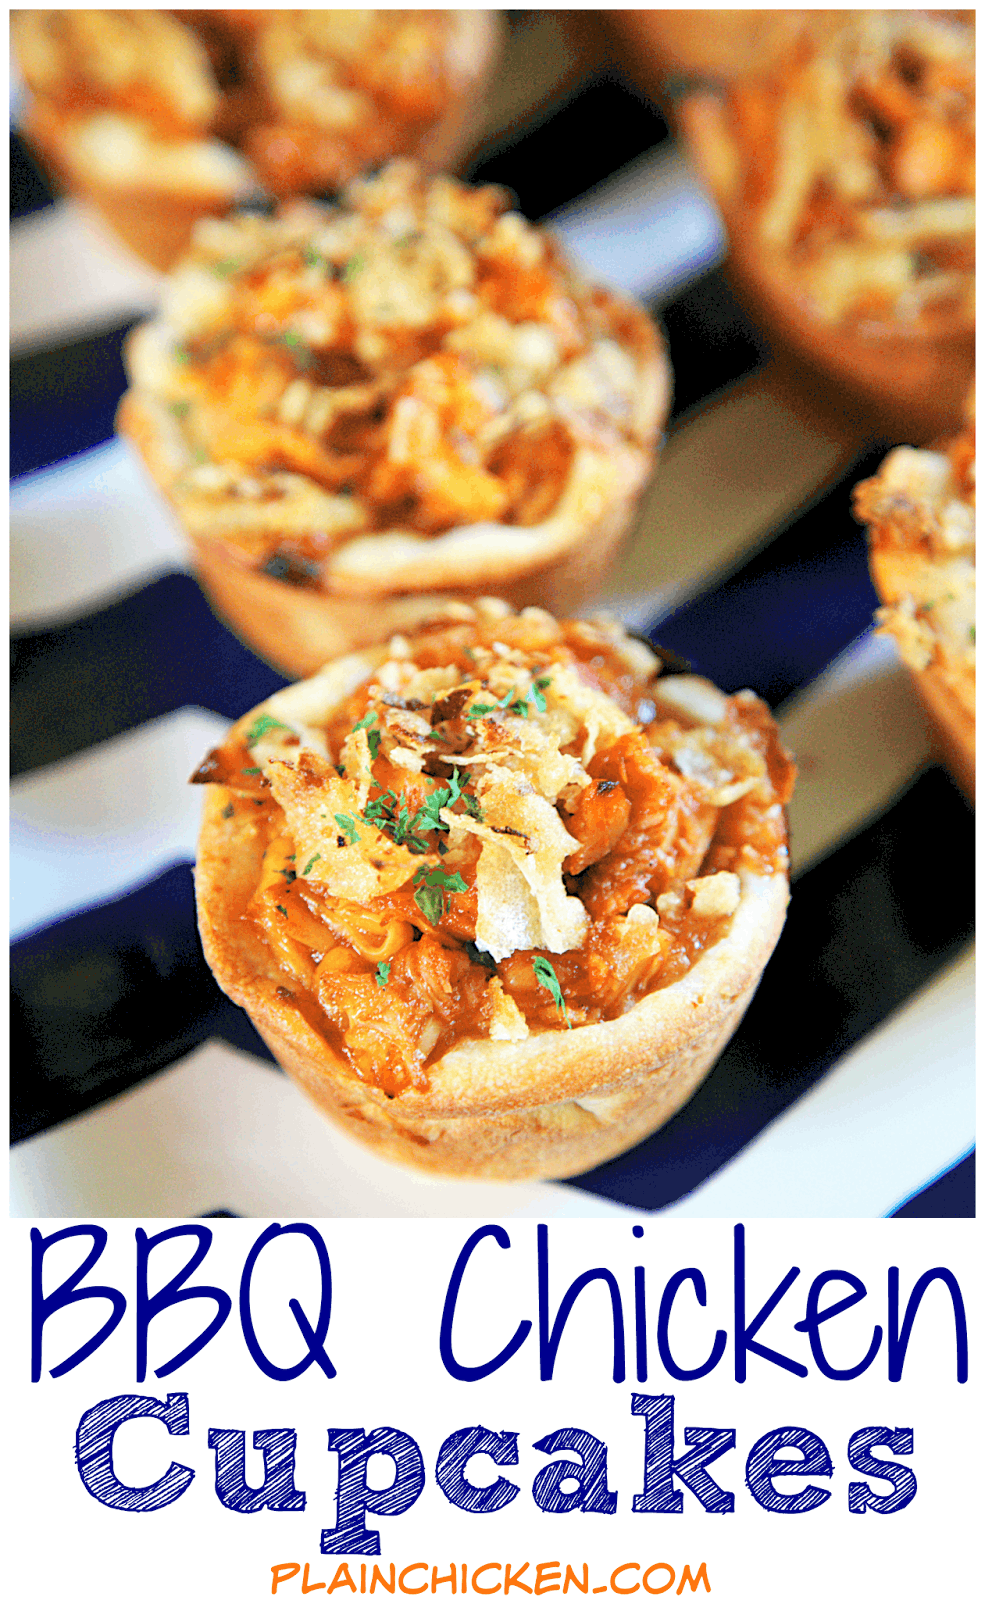 BBQ Chicken Cupcakes - chicken, bbq sauce, cheese, refrigerated pizza dough baked in a muffin pan and topped with French fried onions. So simple and SO delicious! Great for tailgating or a quick lunch/dinner. Can swap chicken for leftover holiday turkey.